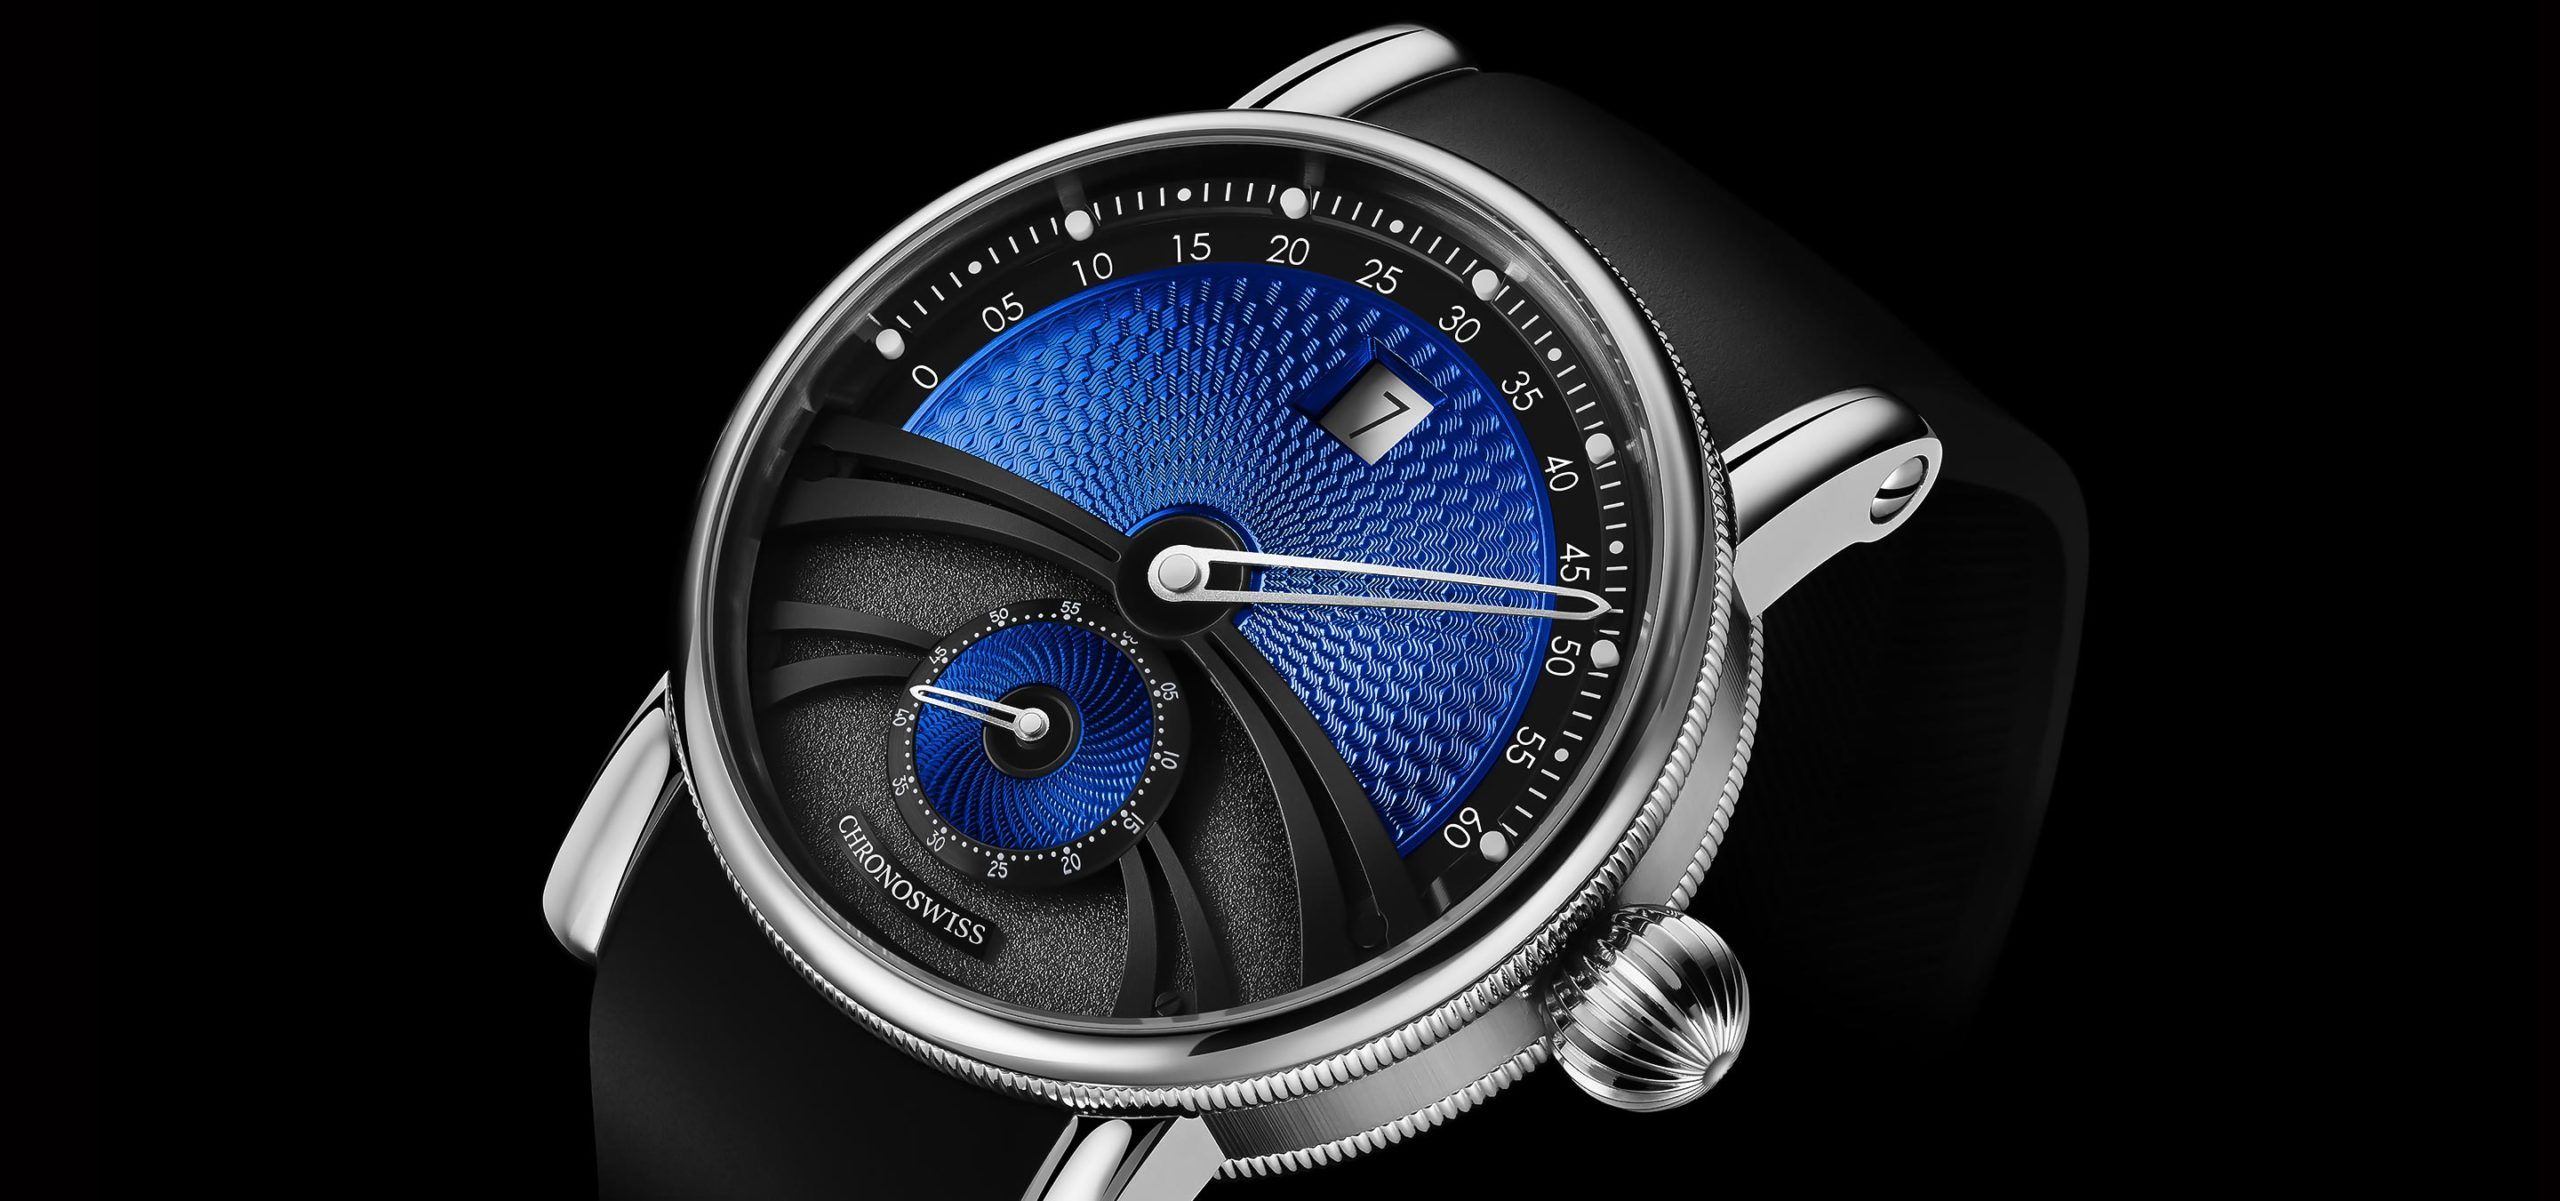 Fusion Of Old And New: Presenting The Chronoswiss Delphis Collection